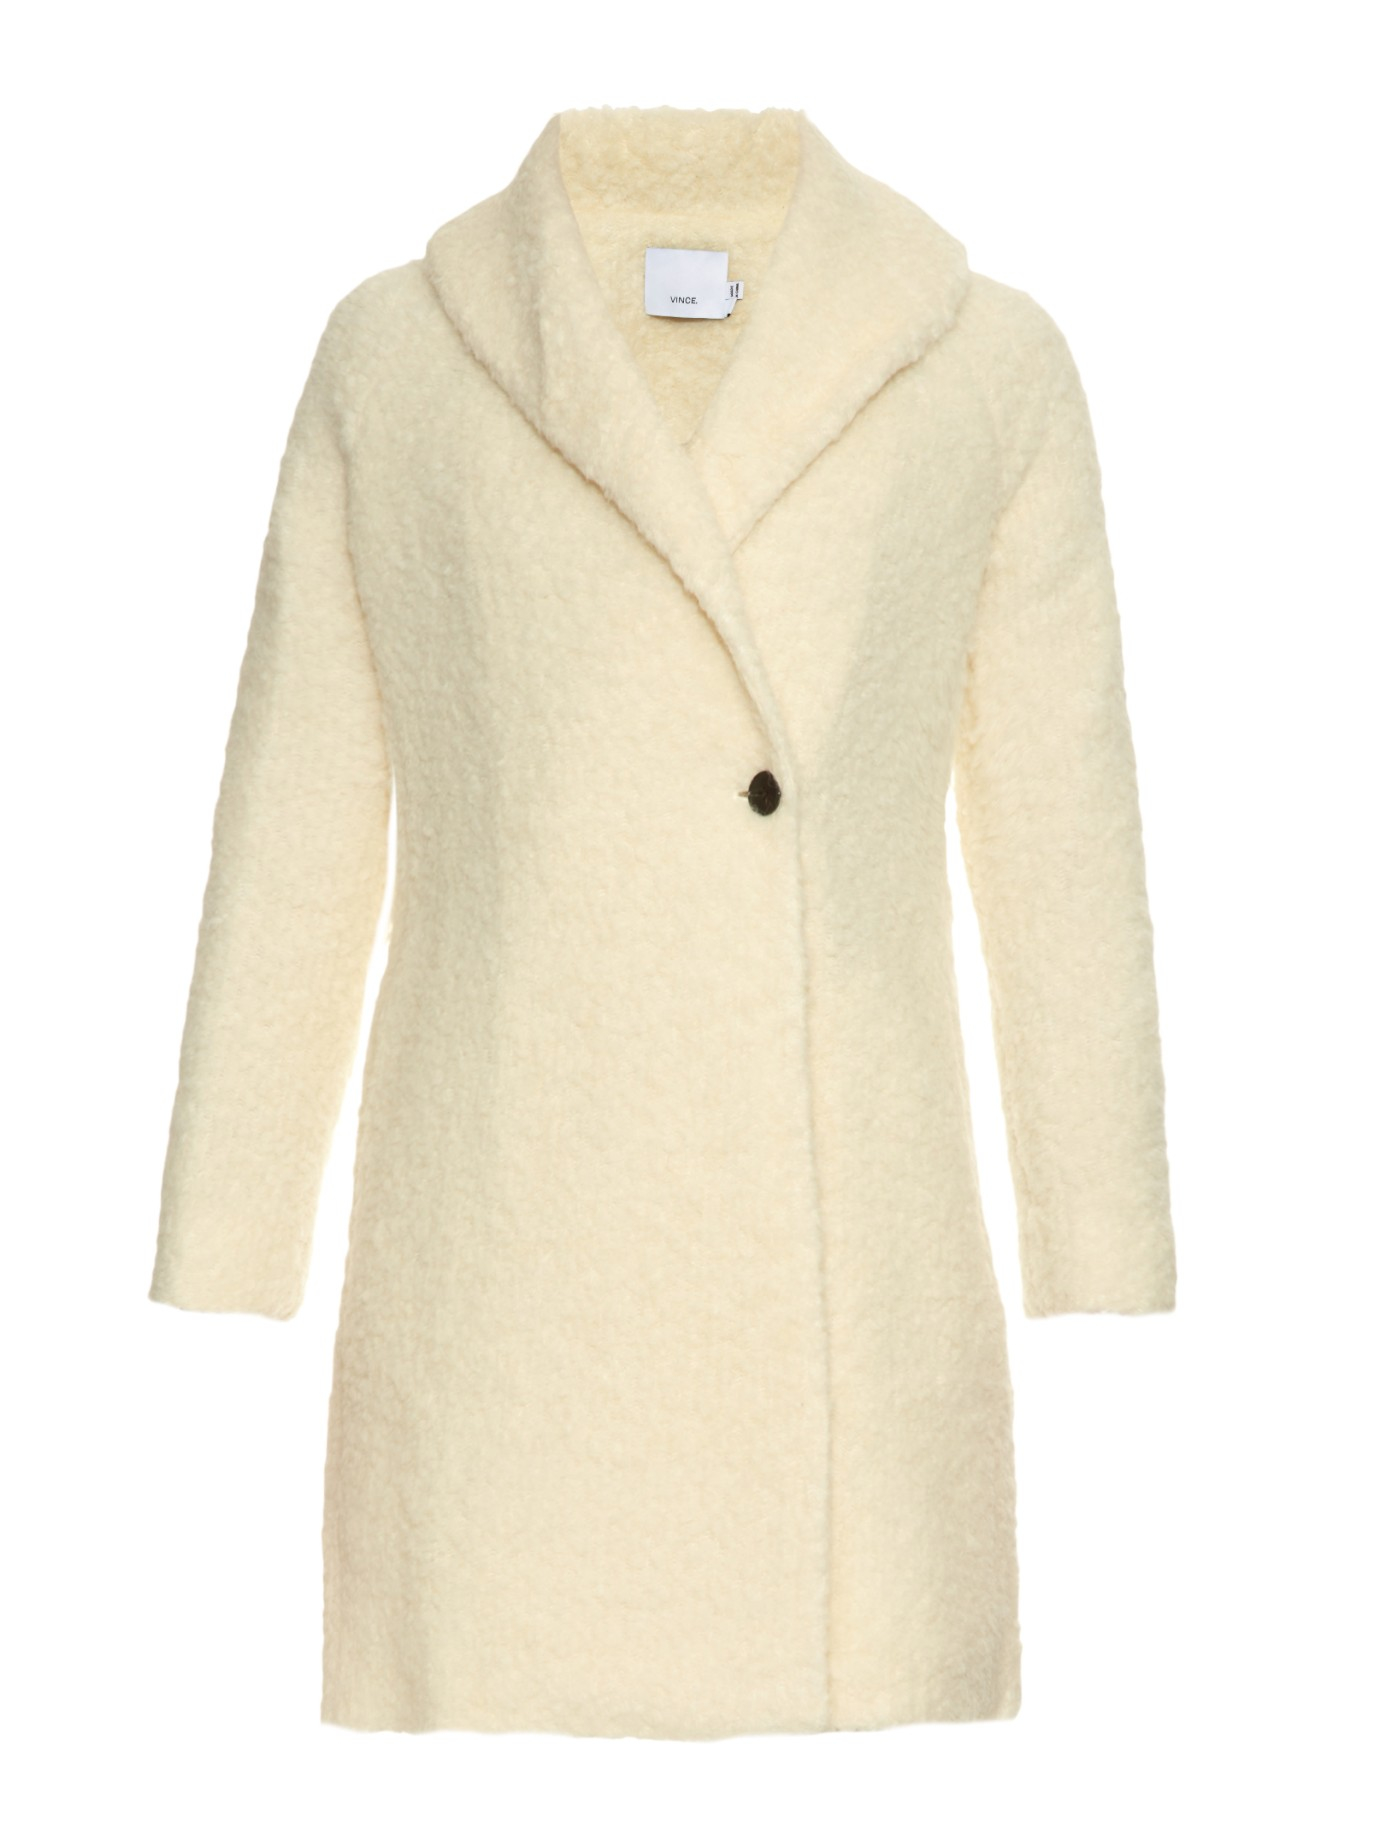 Vince Wool Textured Bouclé Coat in Ivory (White) - Lyst